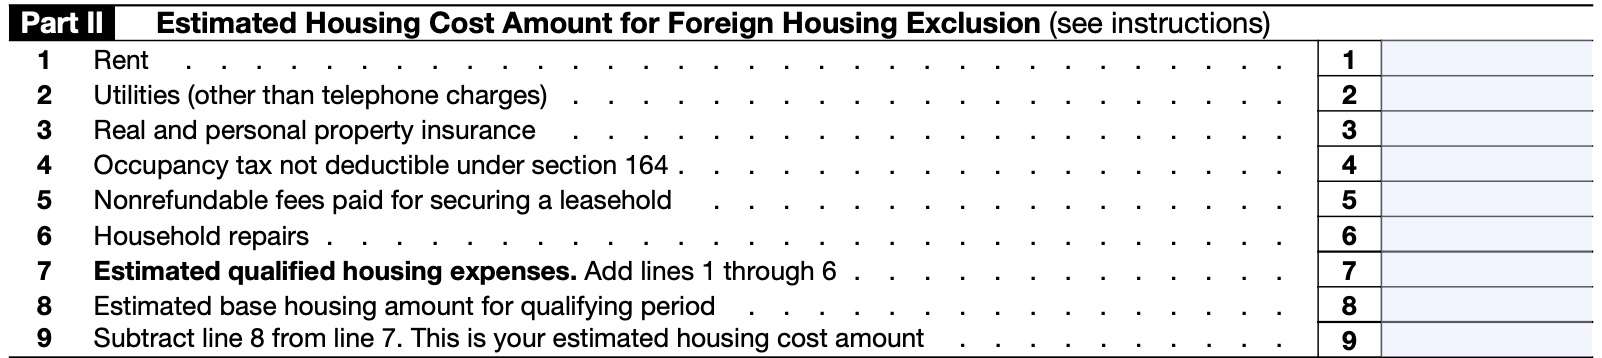 part ii: estimated housing cost amount for foreign housing exclusion